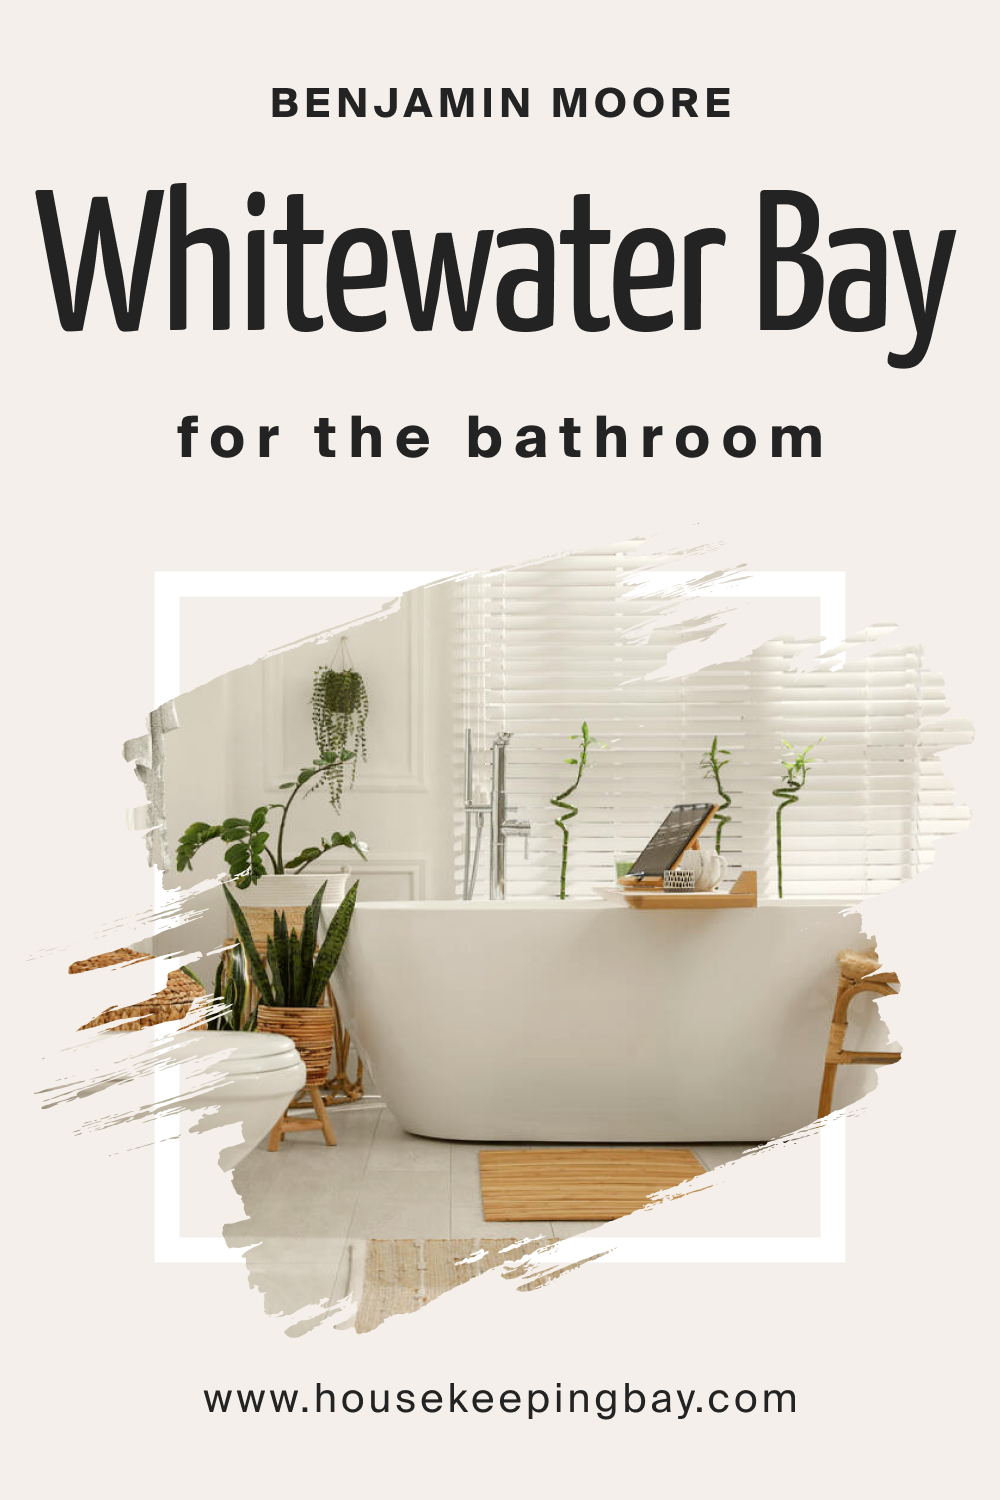 Benjamin Moore. Whitewater Bay OC 70 for the Bathroom